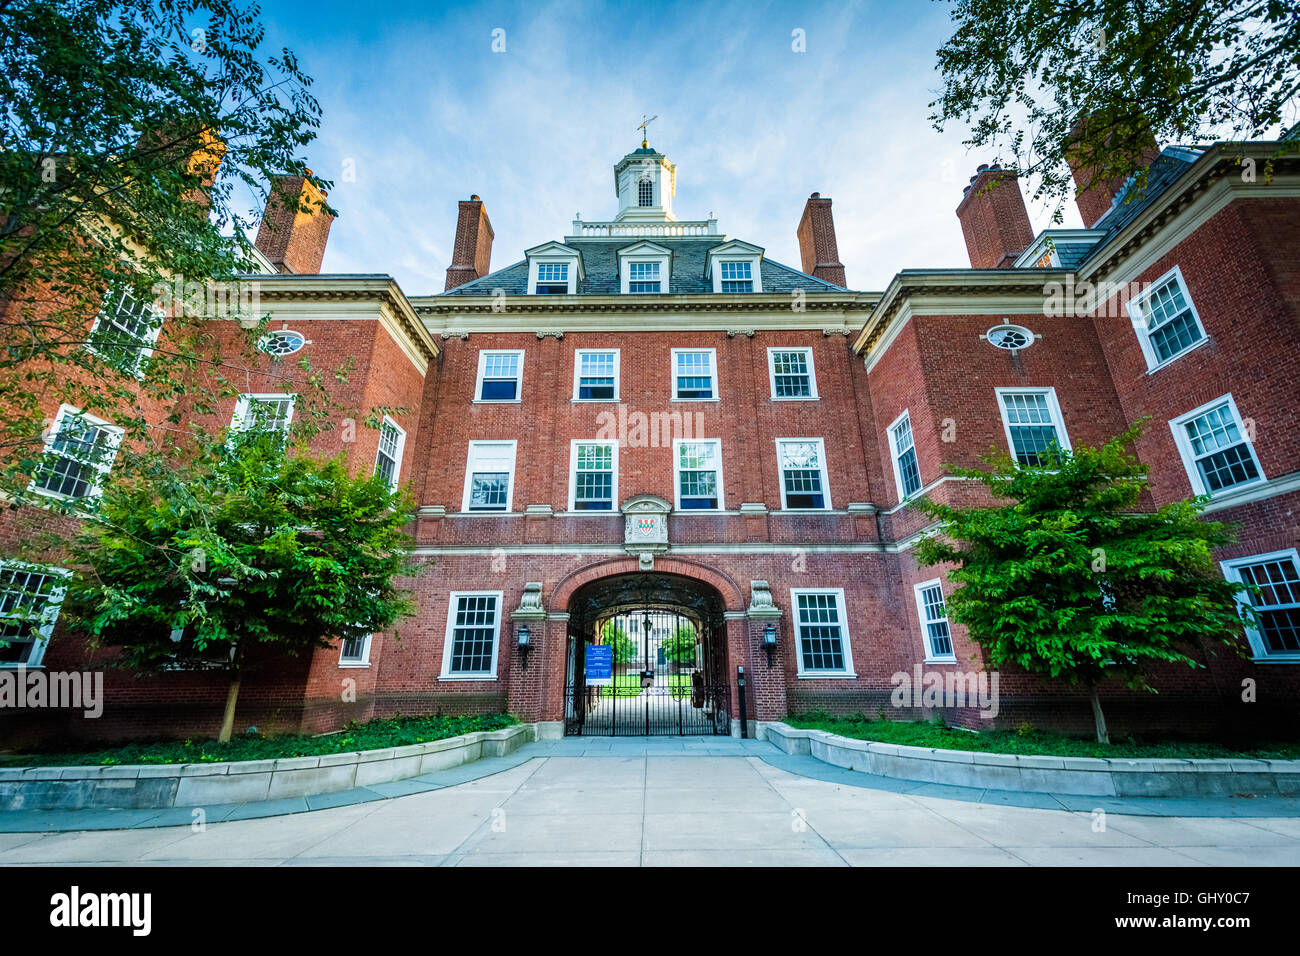 Silliman Hochschule, an der Yale University in New Haven, Connecticut. Stockfoto